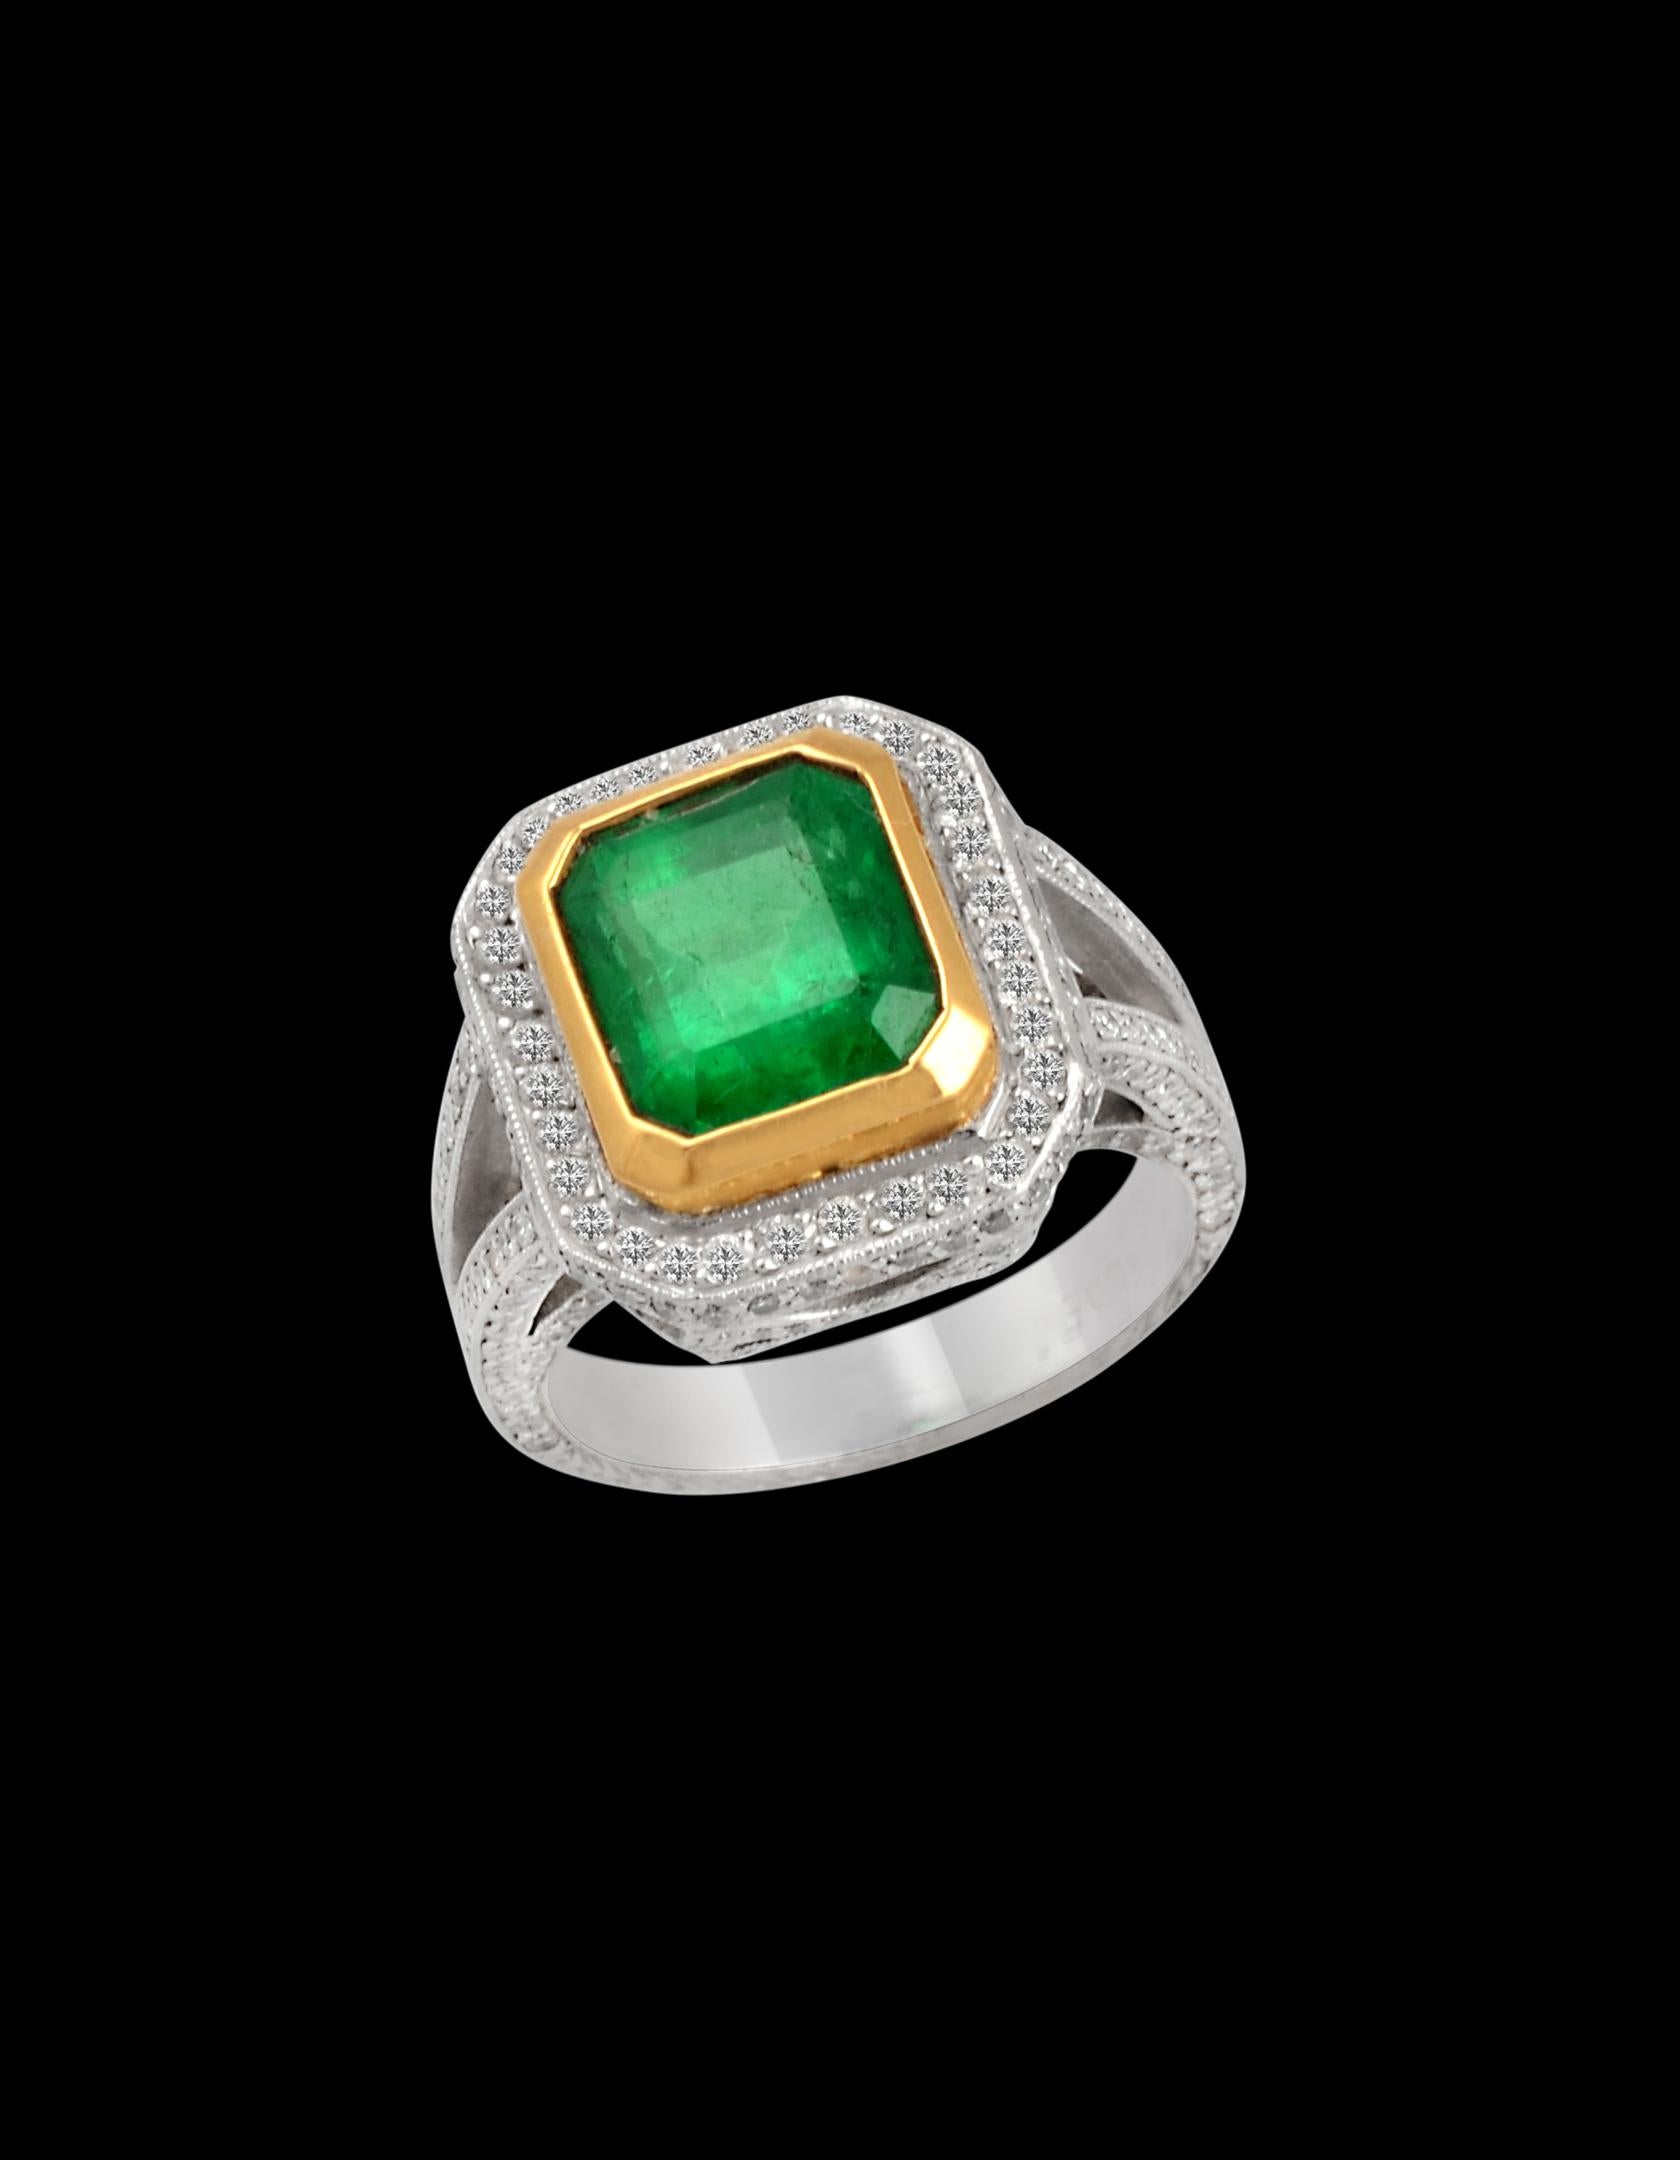 3.8 Carat Emerald Cut Colombian Emerald and Diamond Ring Platinum, Two-Tone 3